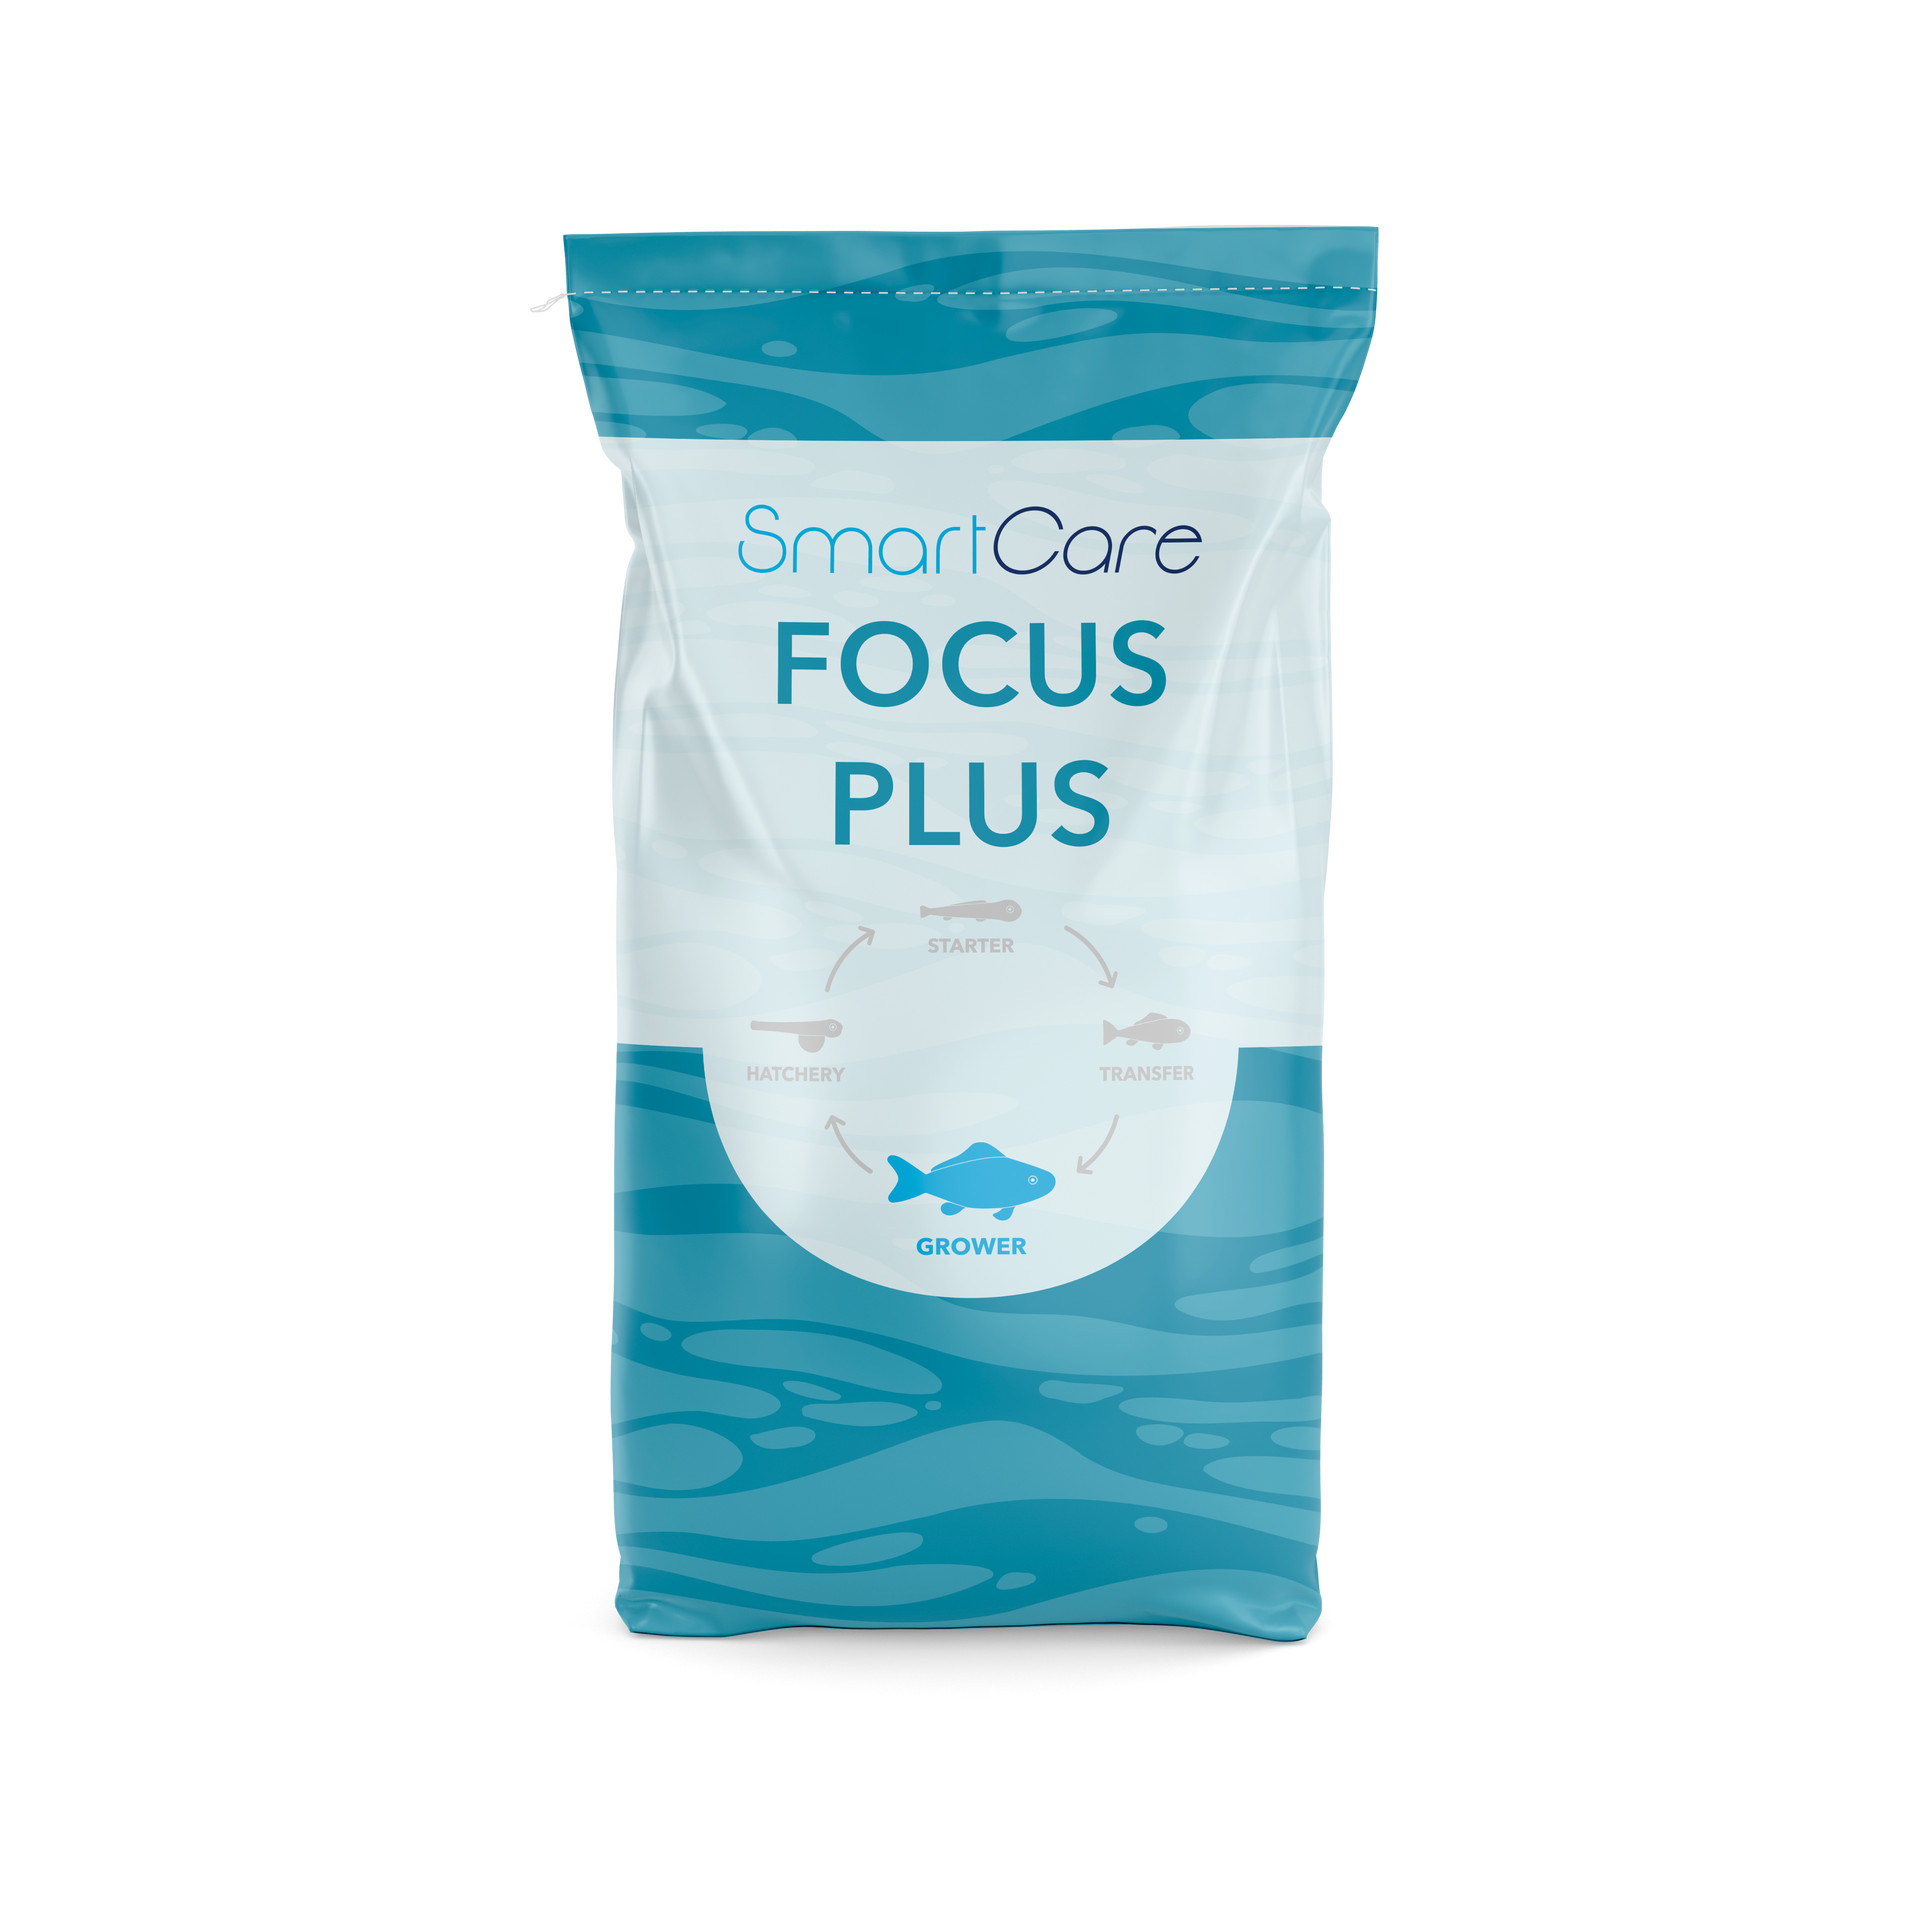 SmartCare FOCUS PLUS health feed for Yellowtail Kingfish